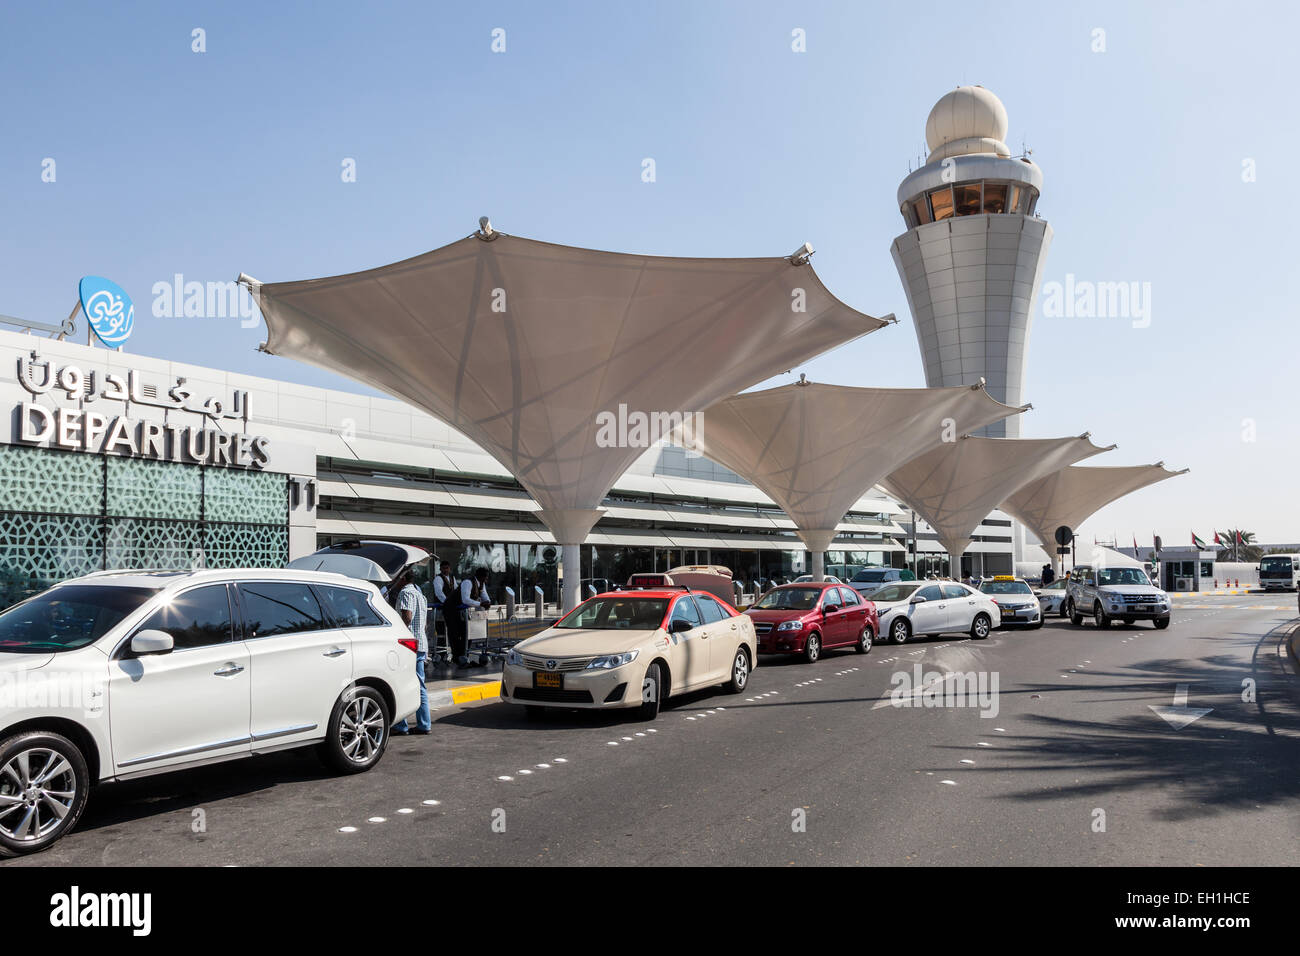 Taxis at the Abu Dhabi International Airport. December 19, 2014 in Abu Dhabi, United Arab Emirates Stock Photo